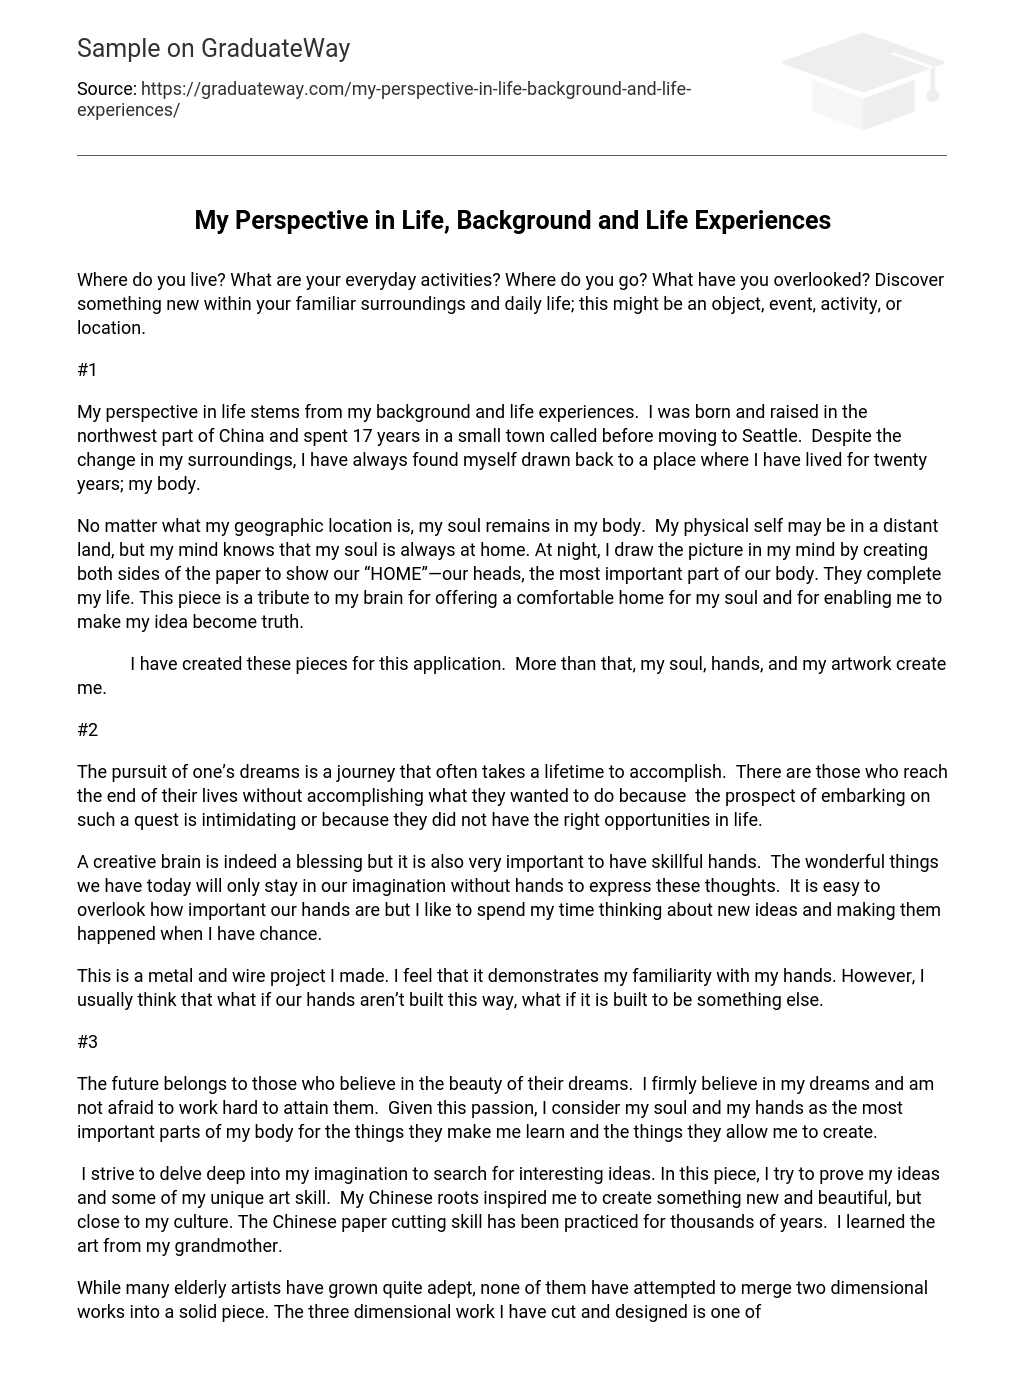 My Perspective in Life, Background and Life Experiences